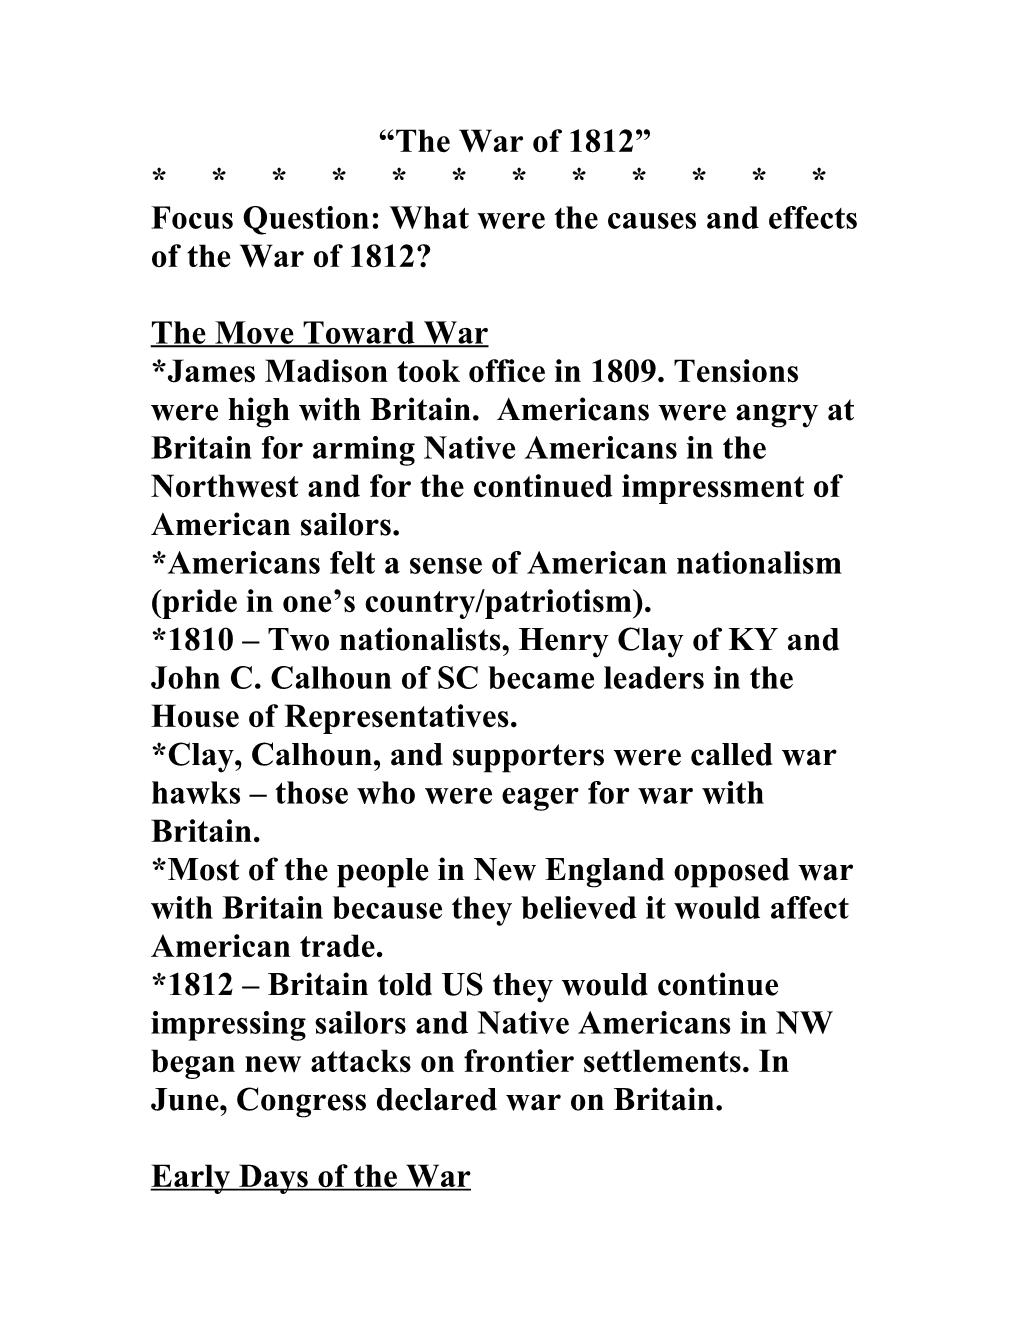 Focus Question: What Were the Causes and Effects of the War of 1812?